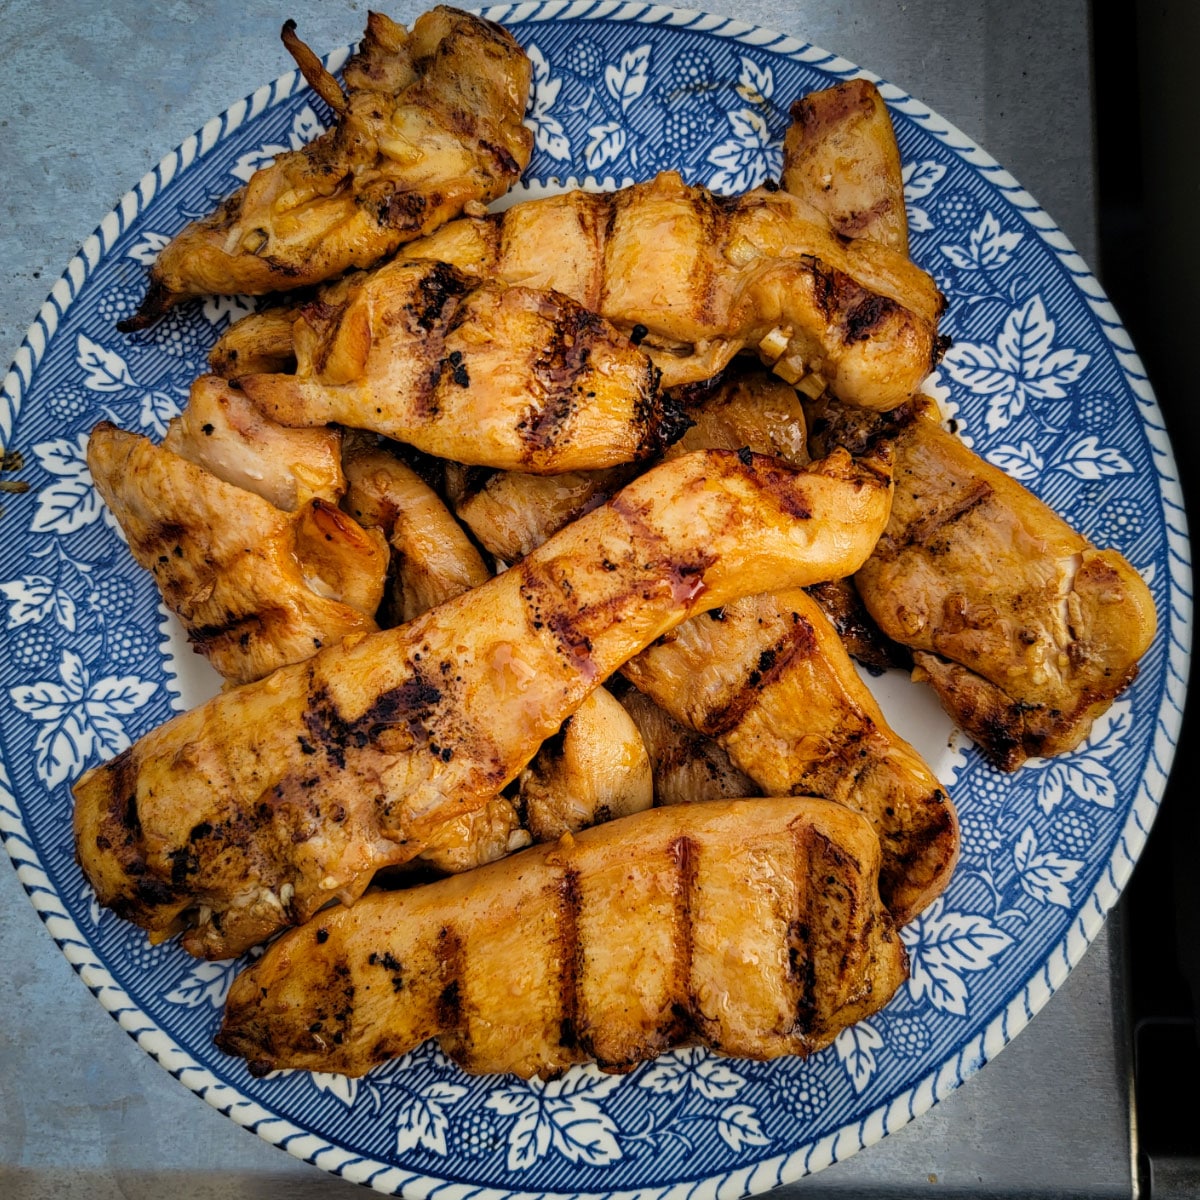 Chicken that was marinated and grilled sitting on a plate ready to serve